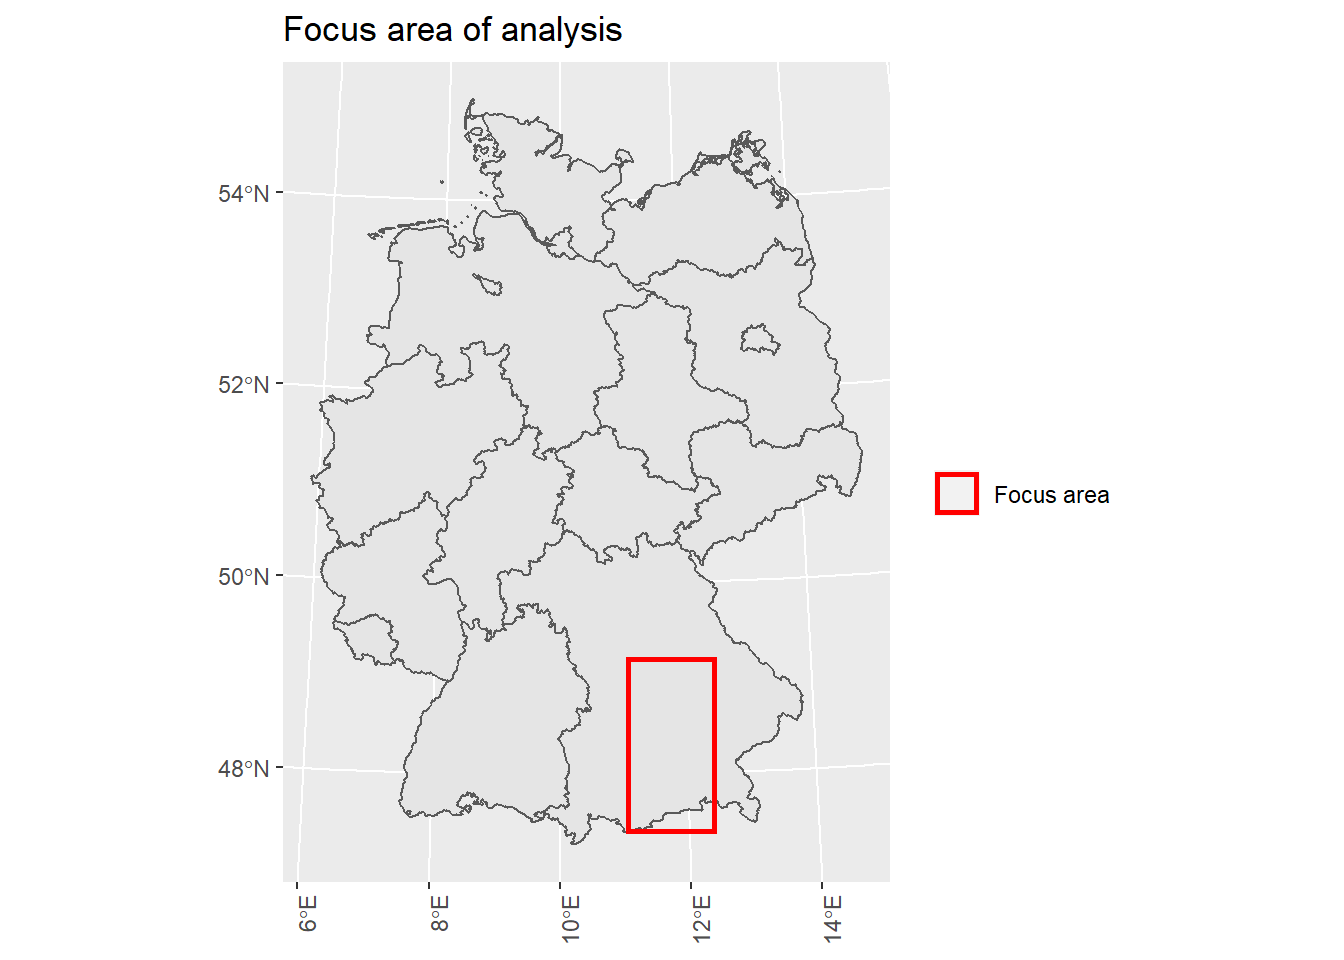 For computational reasons we will only focus on a subset of the tiles located in the state of Bavaria because it comprises high diversity in urban, suburban, and rural areas